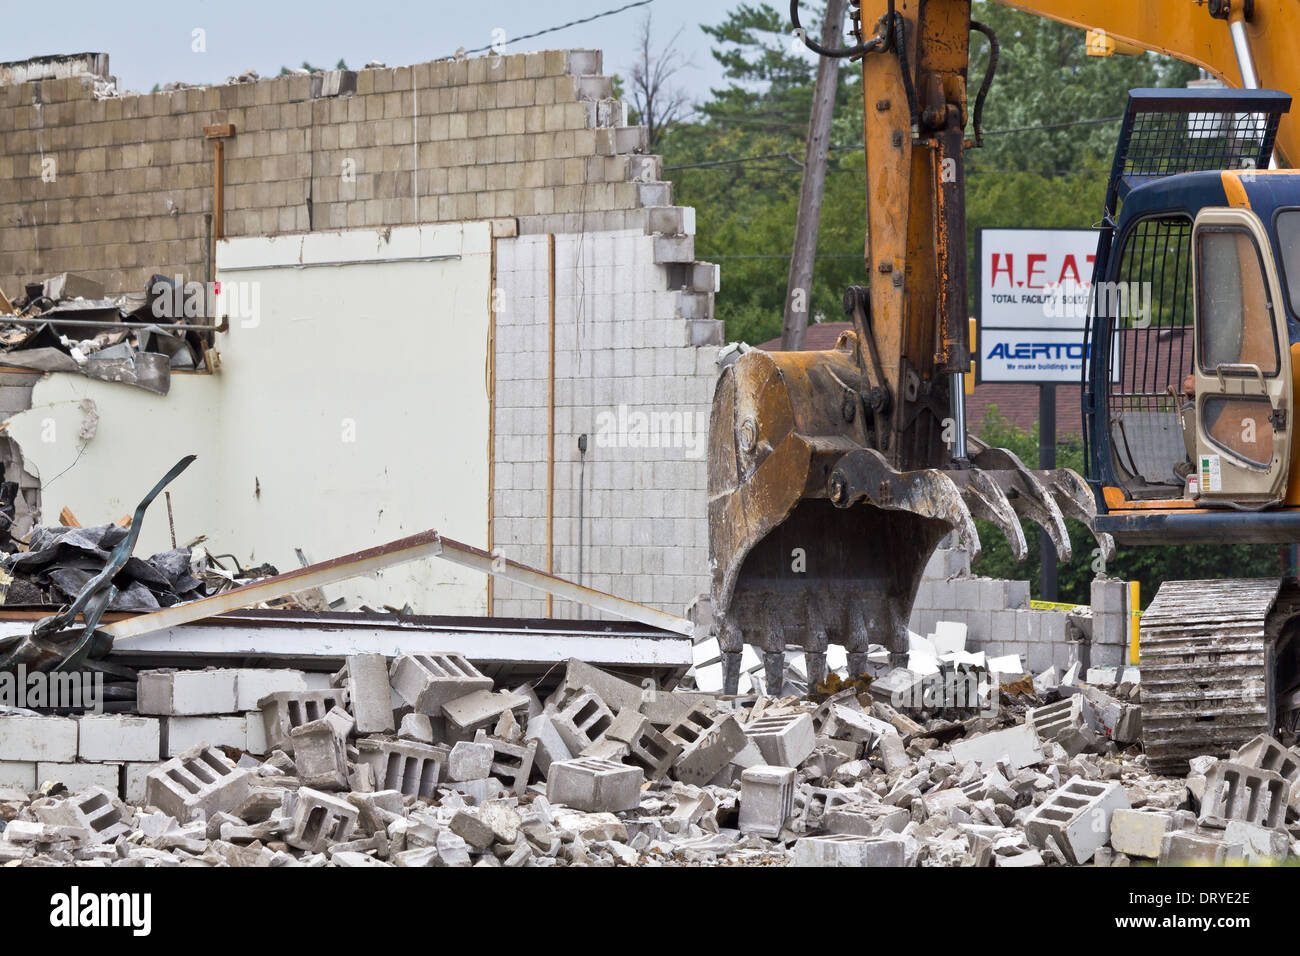 Demolished a buildings in city USA Stock Photo